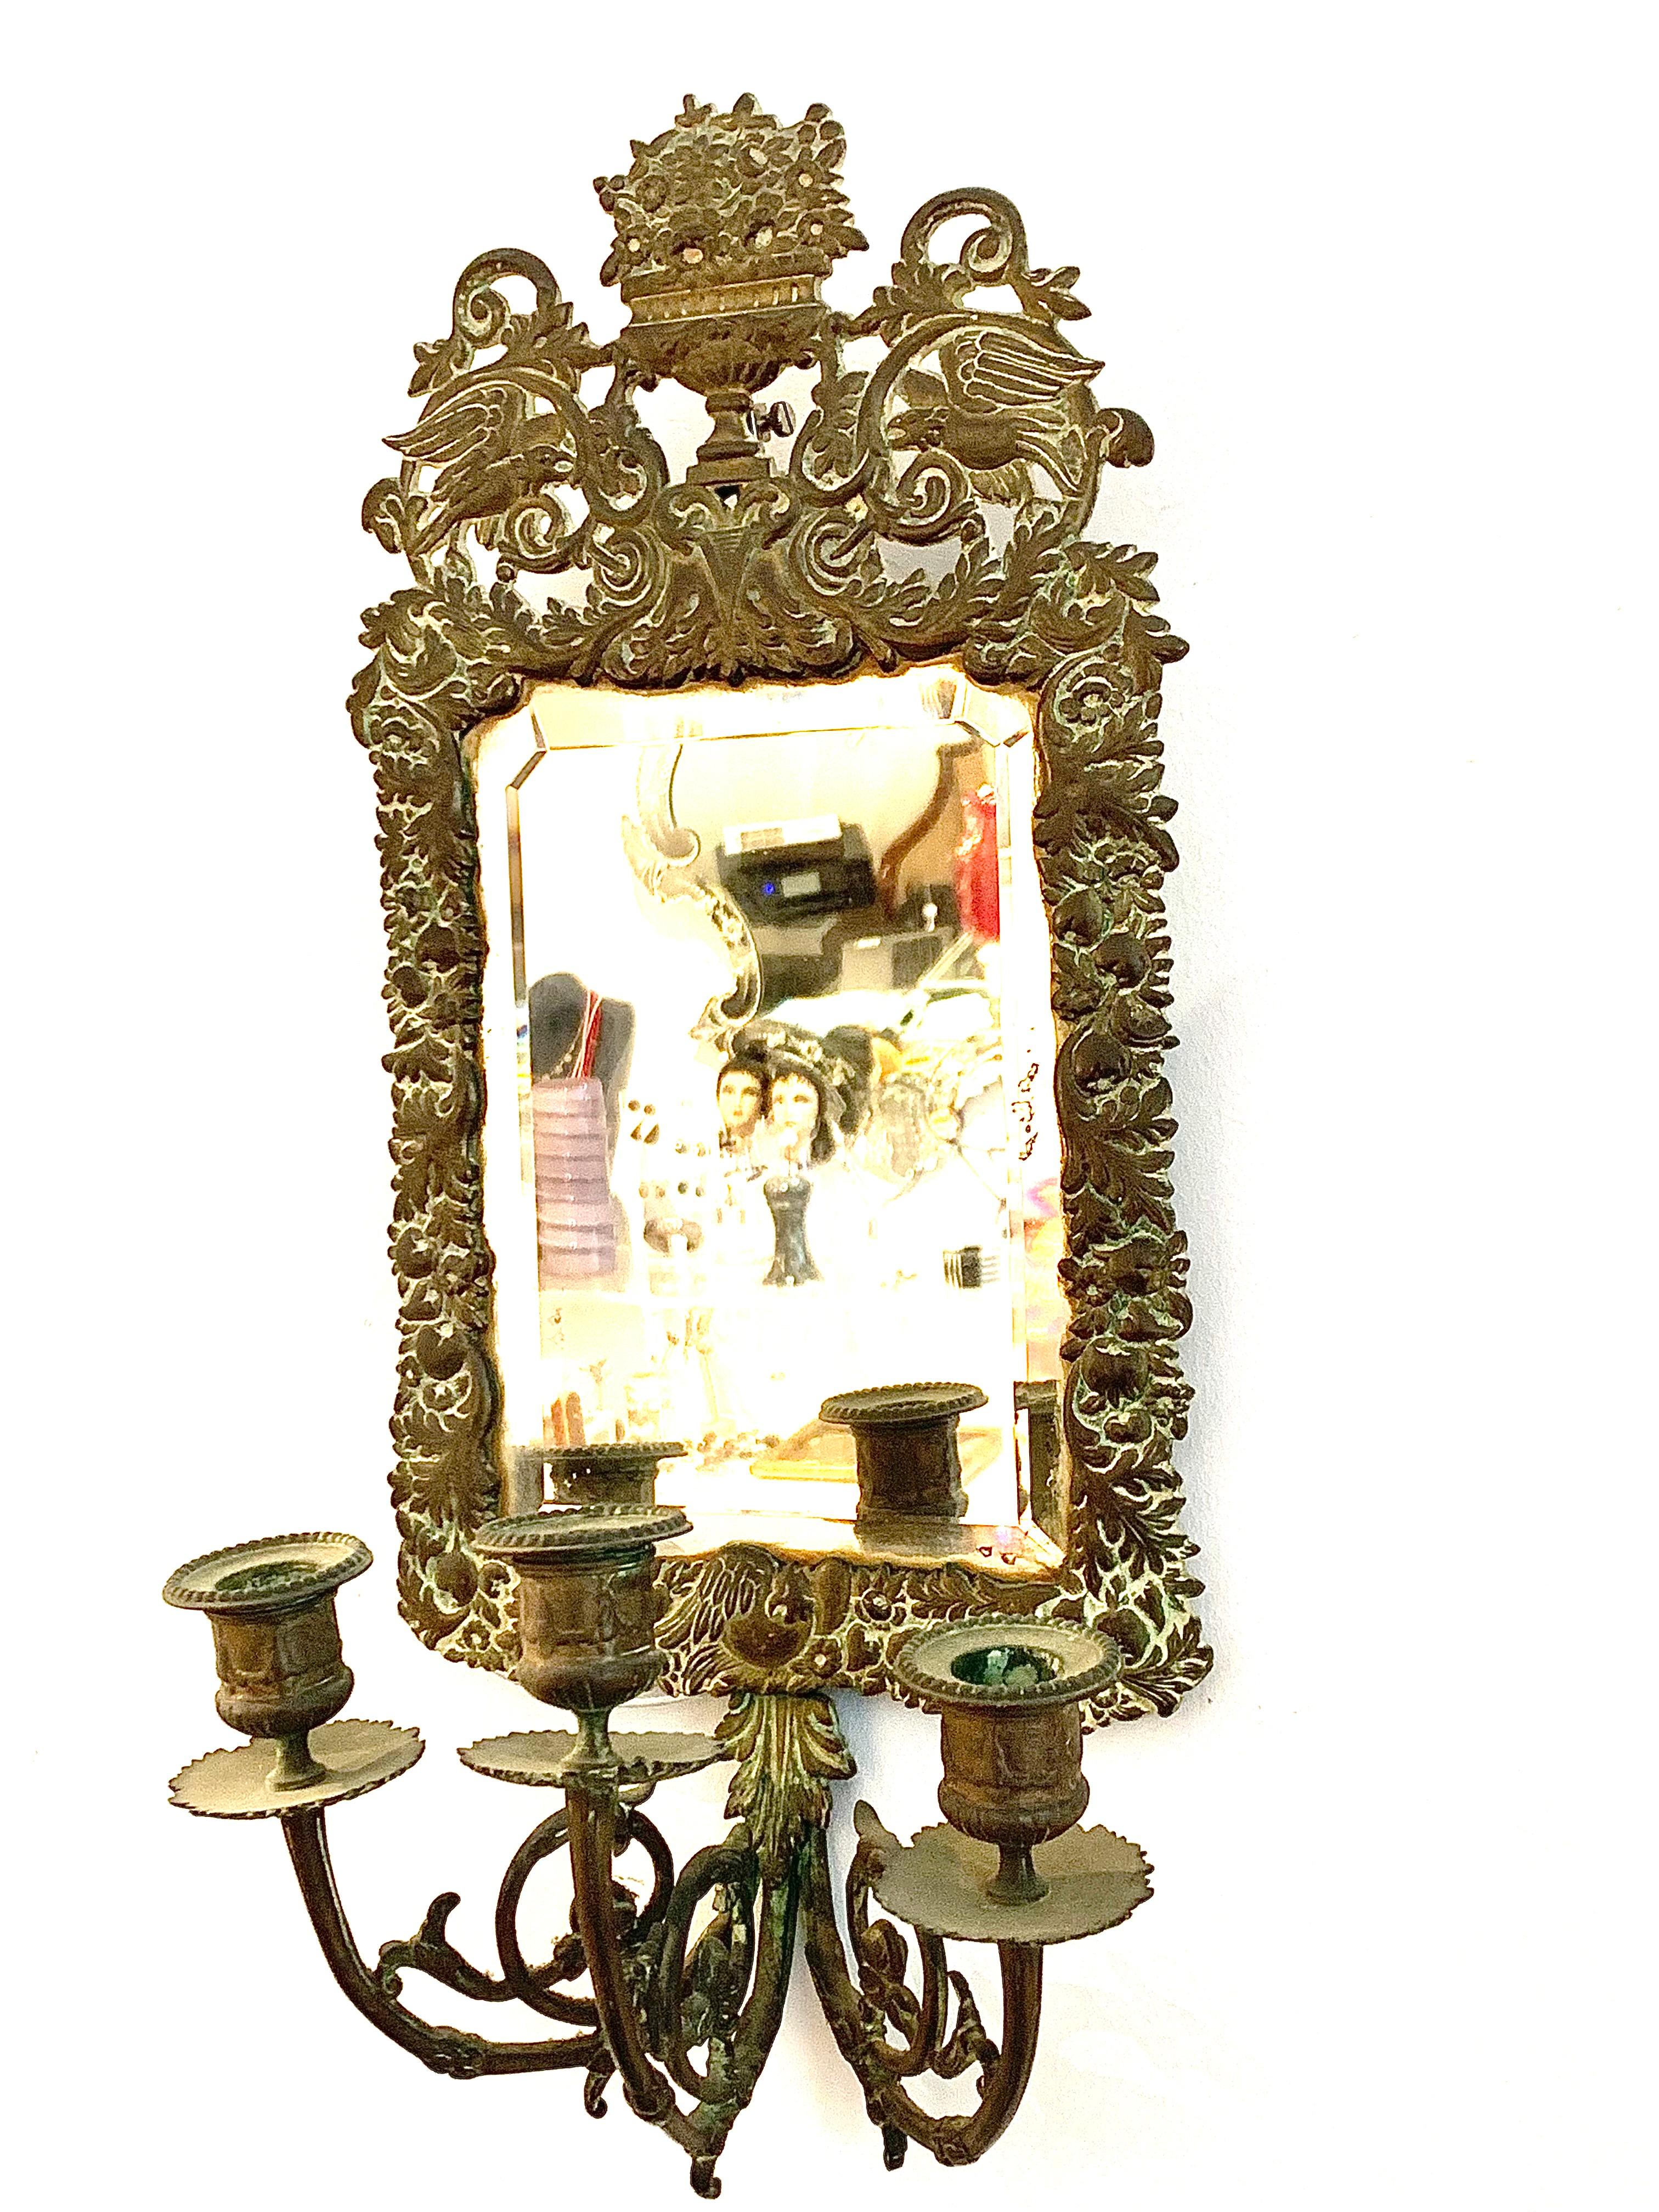 Antique 18th Century Double Eagle Wall Mirrors Candle Sconces Repoussé Brass In Good Condition For Sale In Munich, DE